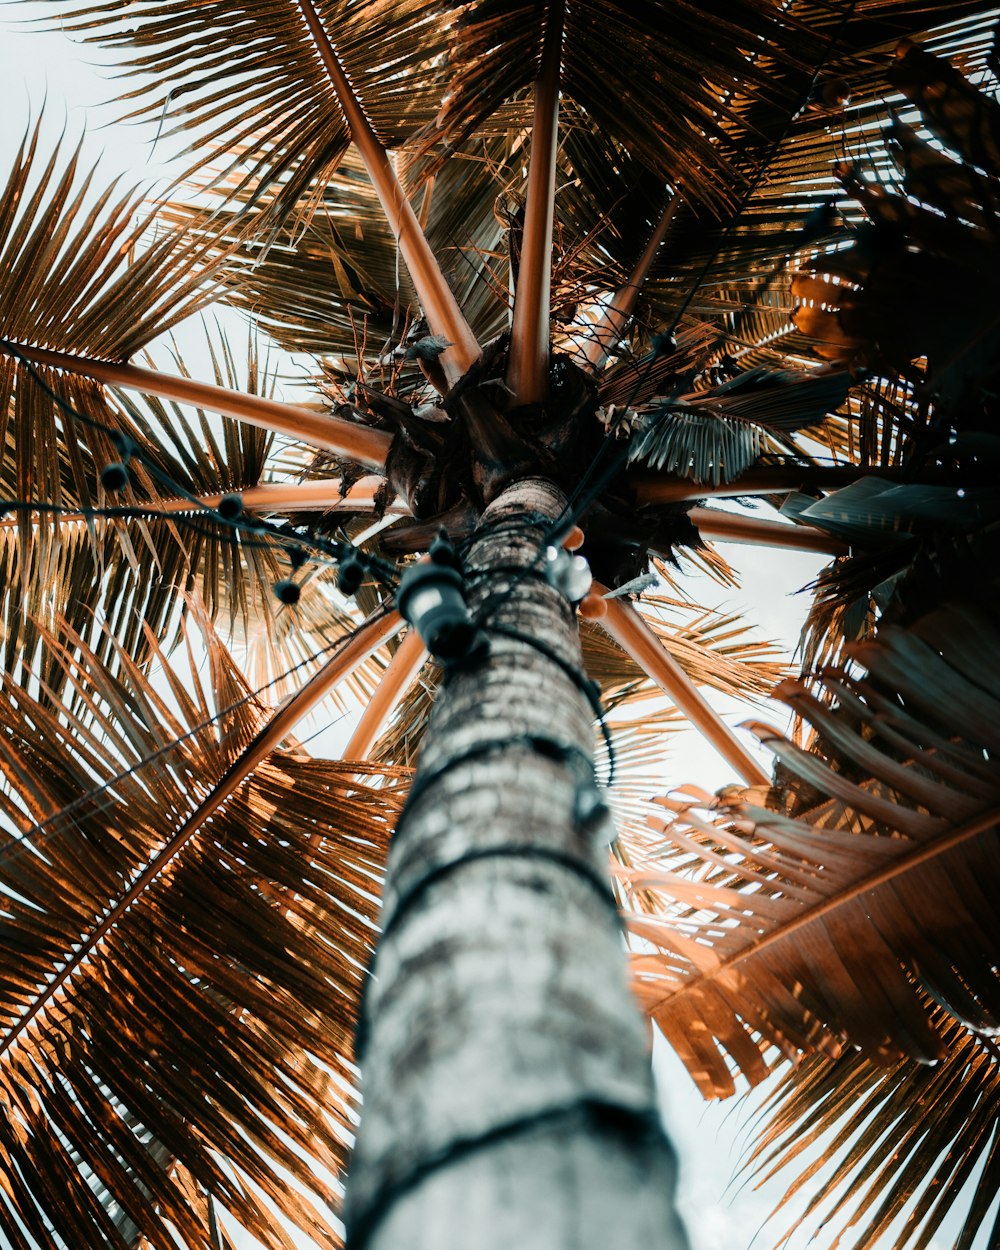 a tall palm tree with a sky background